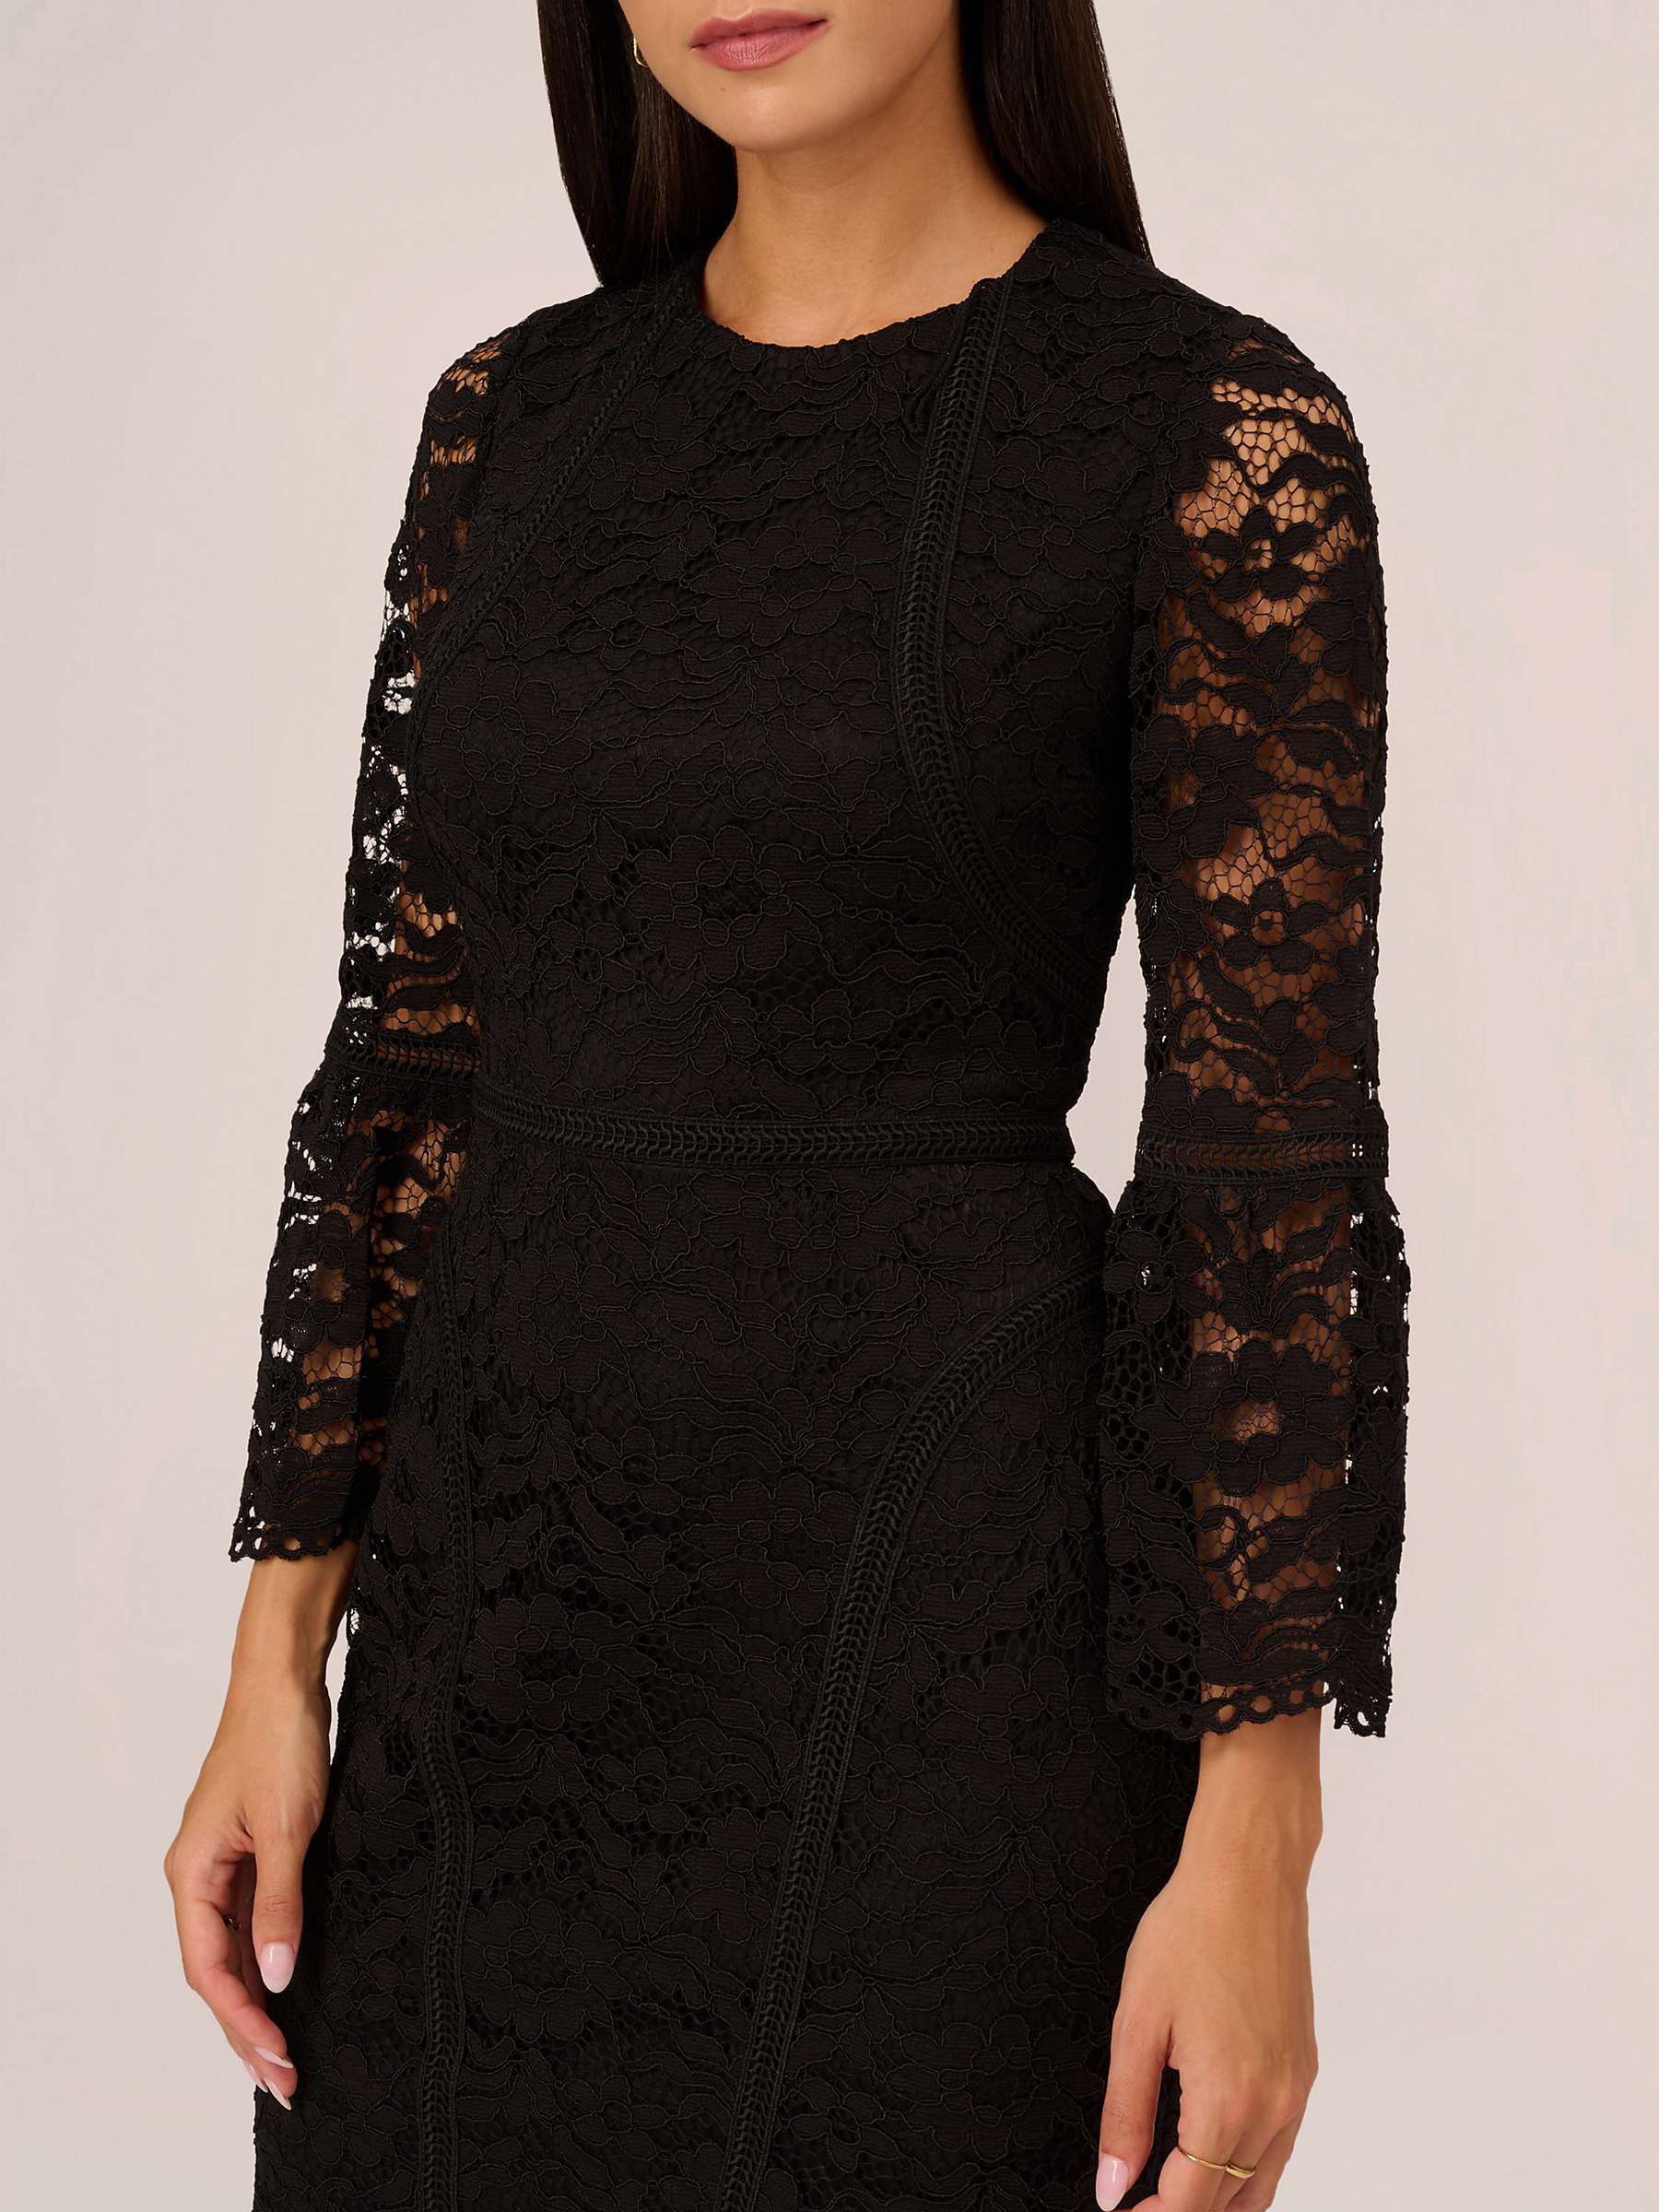 Buy Adrianna Papell Lace Short Dress, Black Online at johnlewis.com